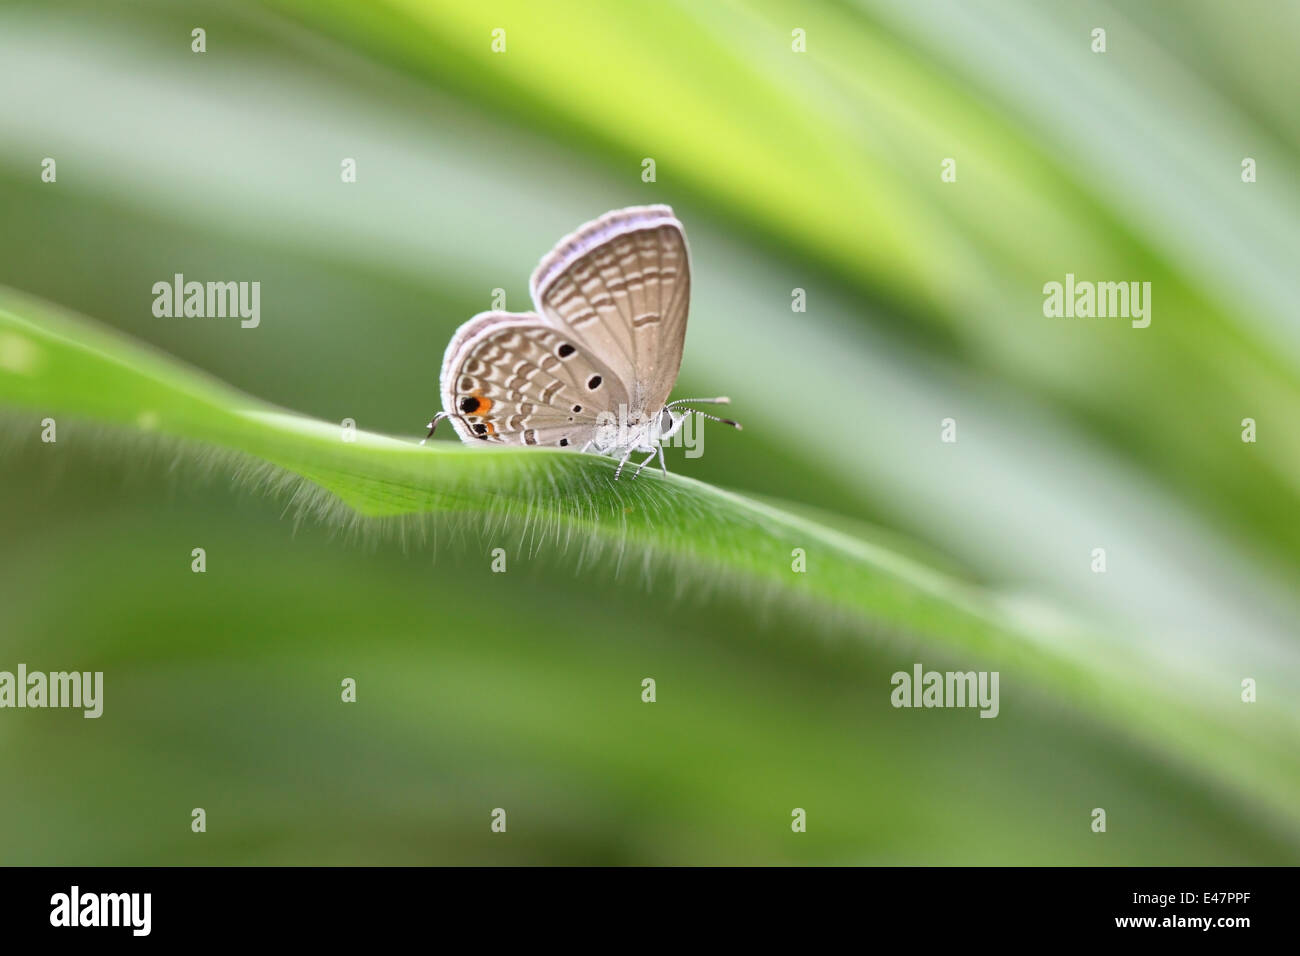 Tawny of Butterfly on green leaves in garden. Stock Photo